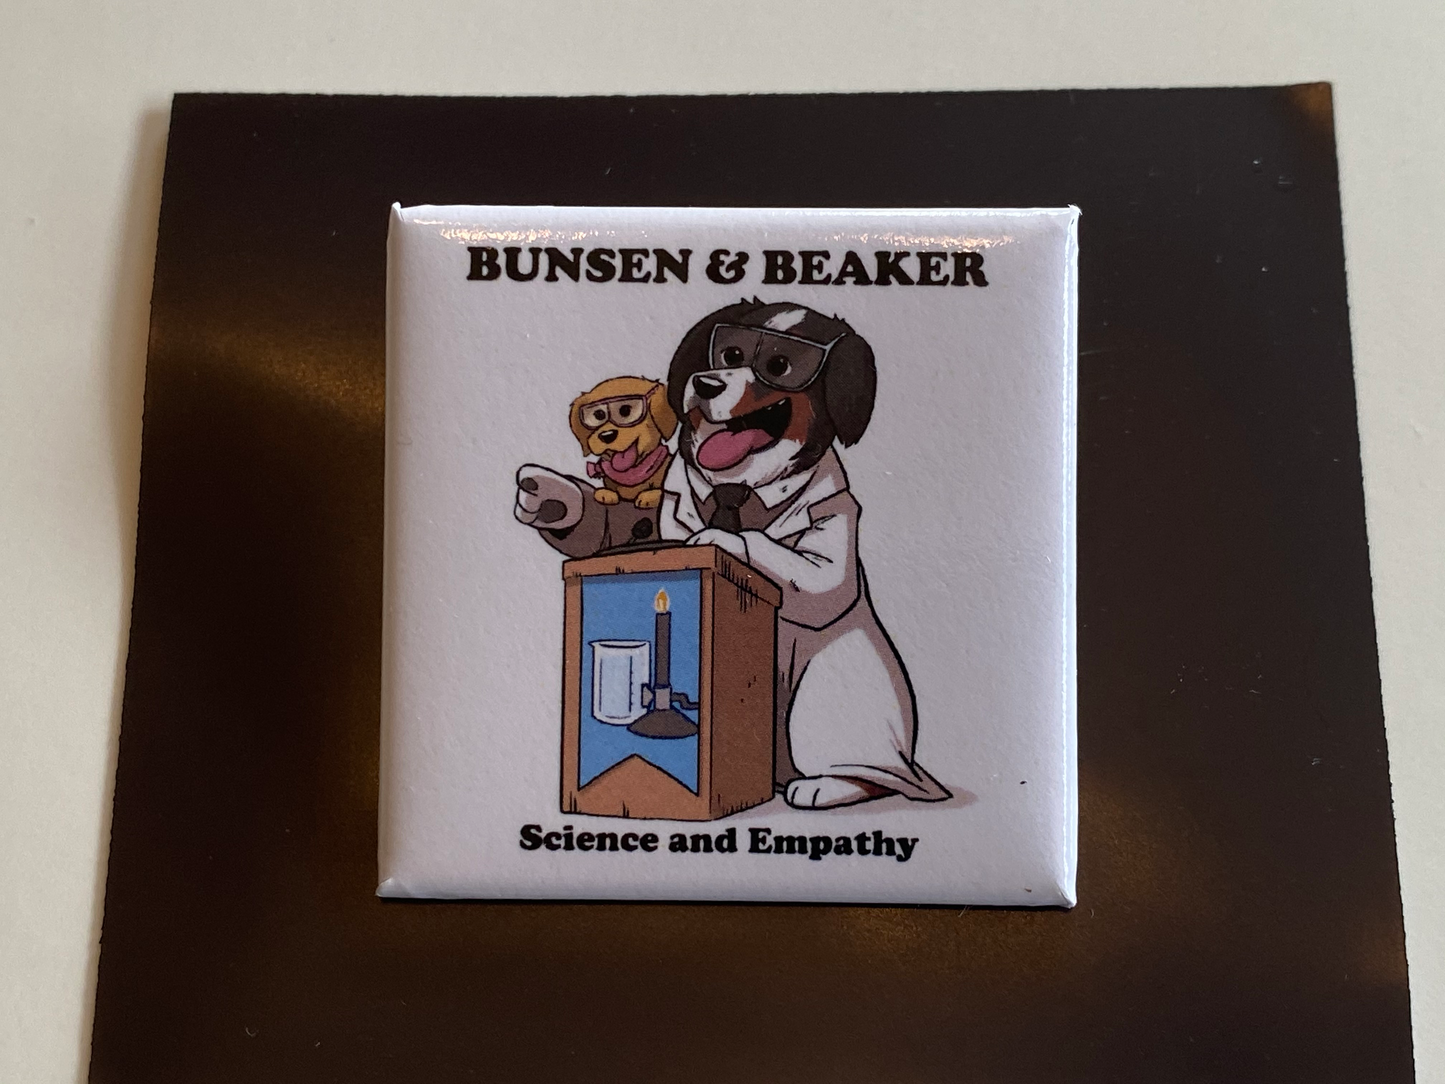 Bunsen and Beaker - Science and Empathy